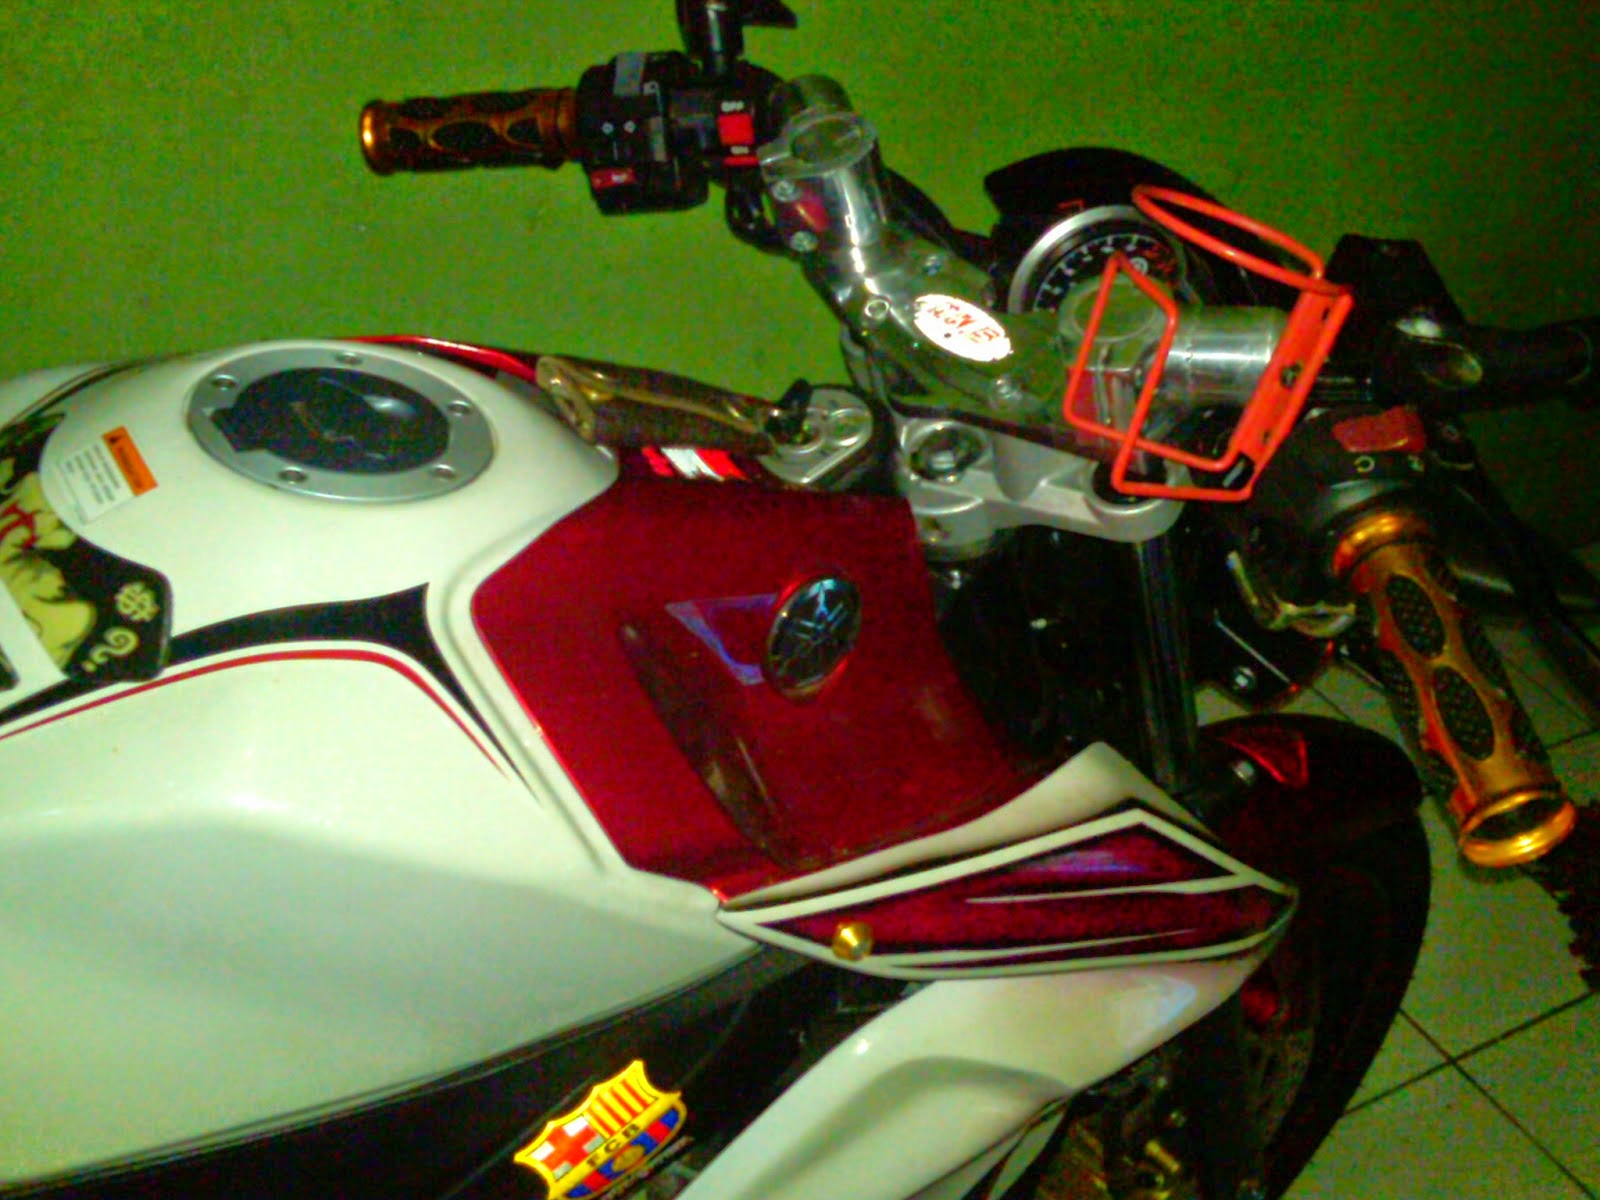 New Vixion Pake Stang Bison  Thecitycyclist